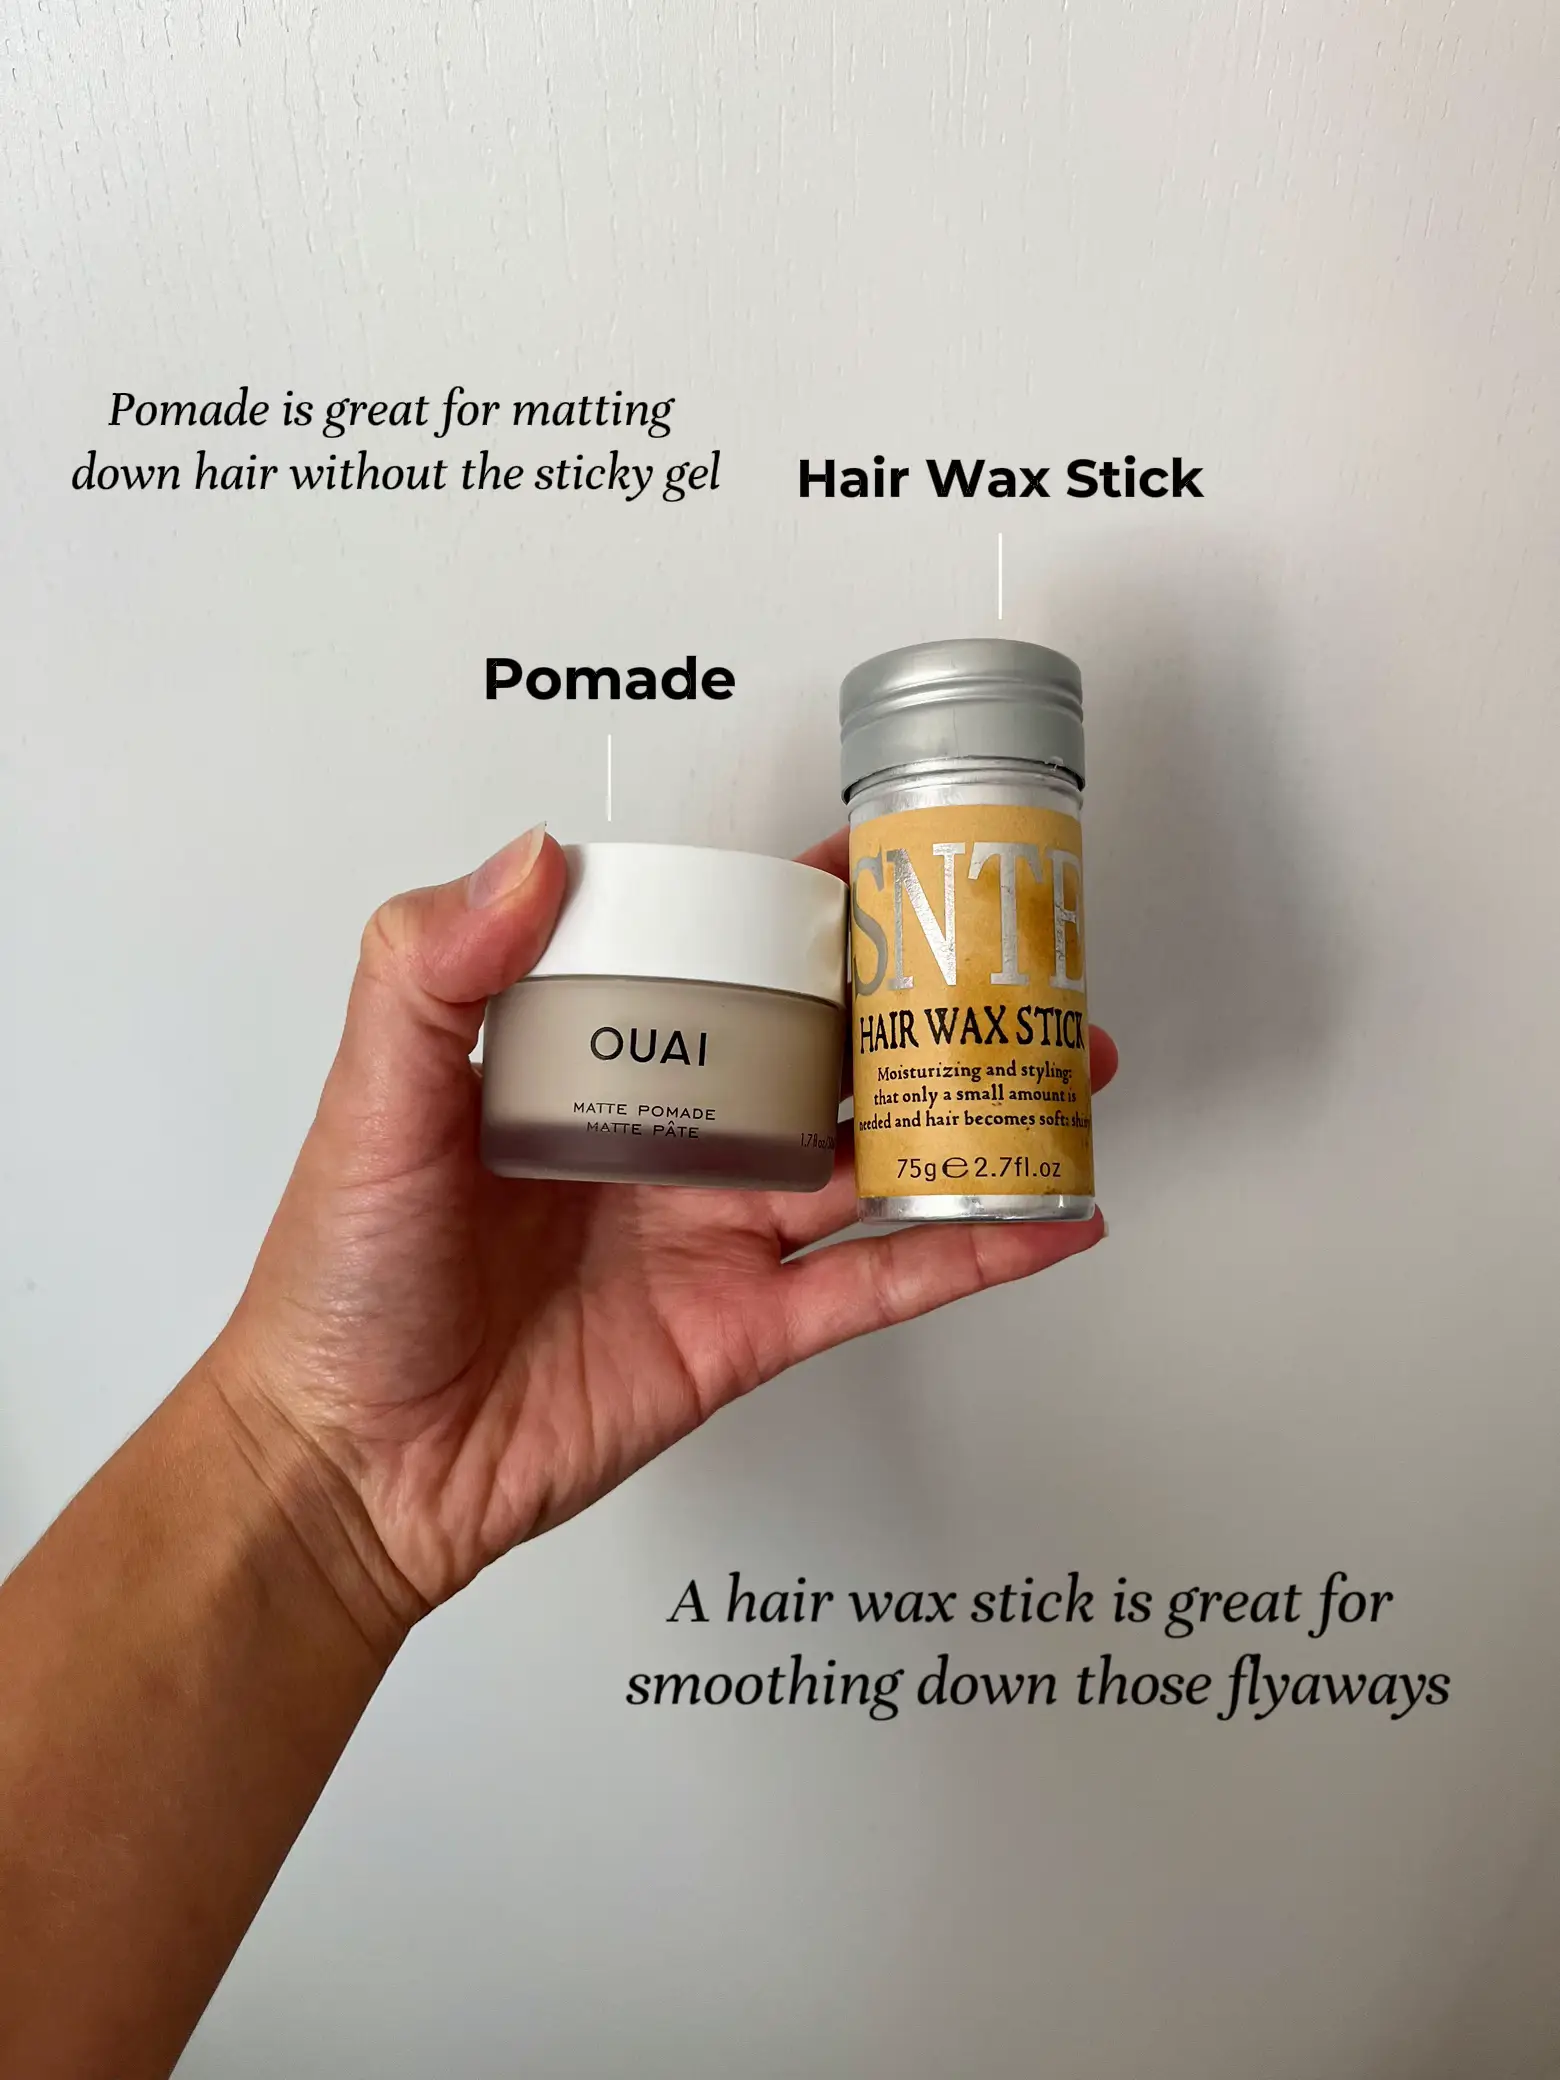 Let's Chat About Pomade vs. Taffy